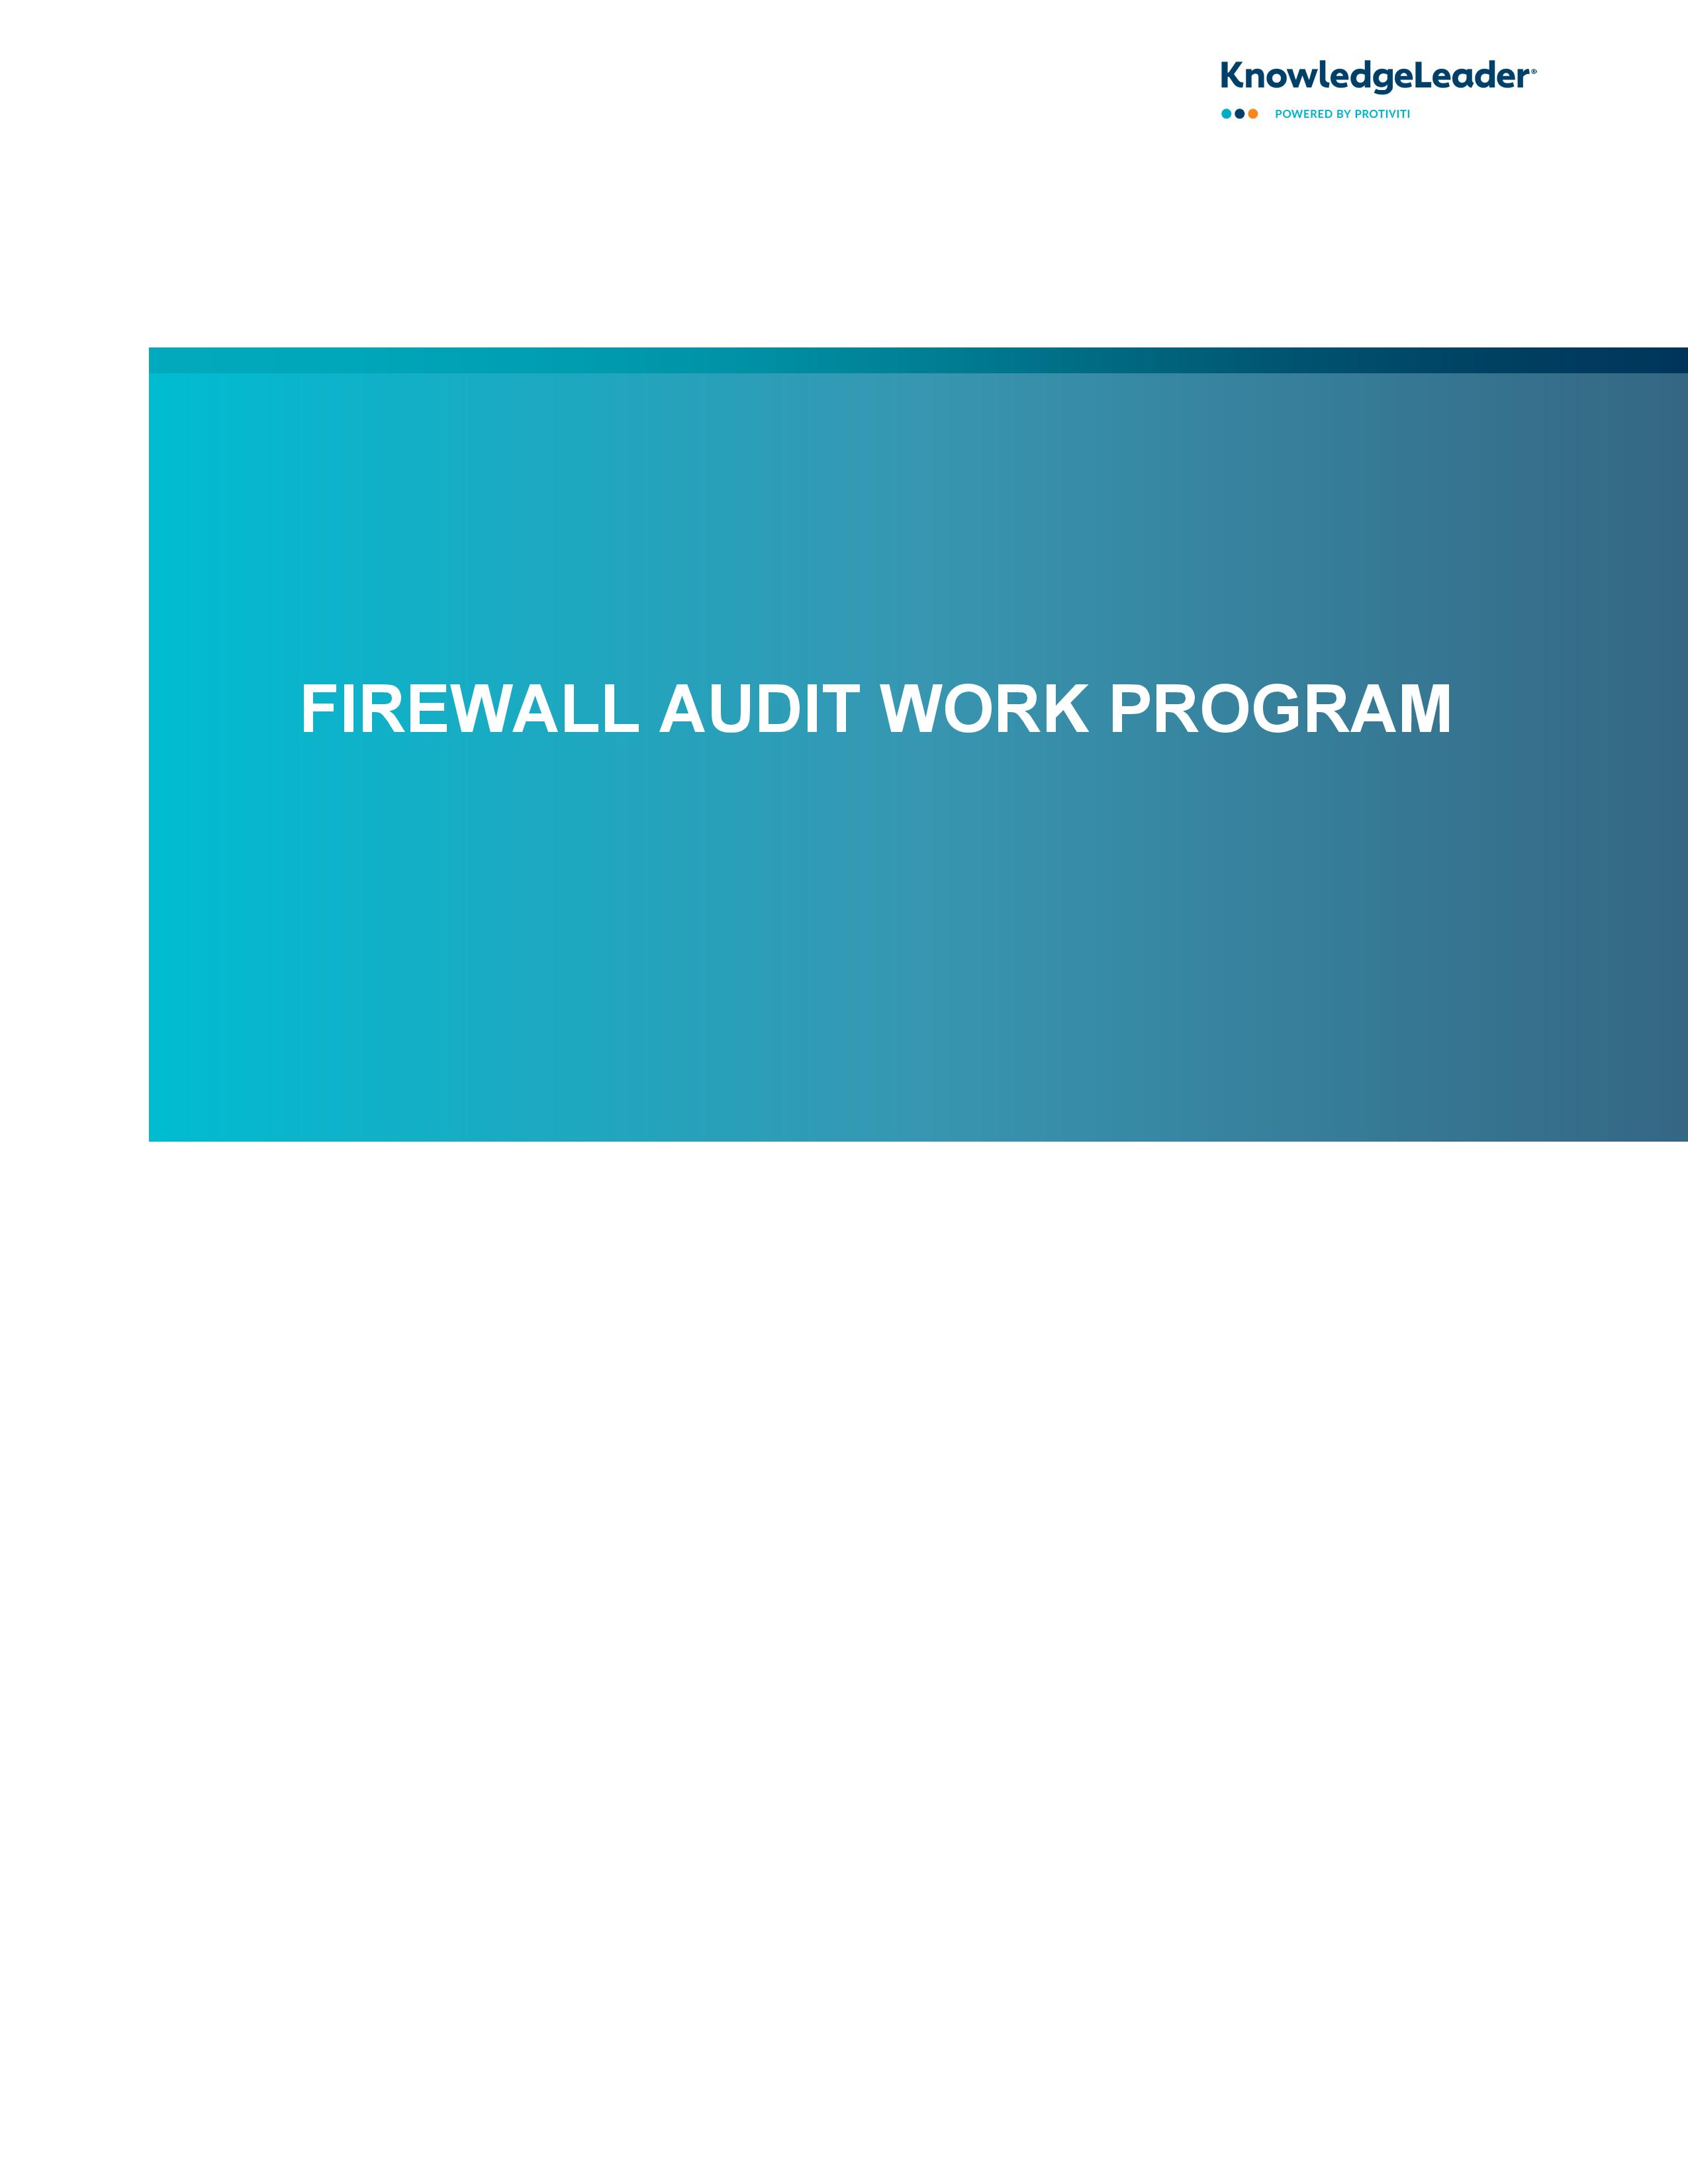 screenshot of the first page of Firewall Audit Work Program